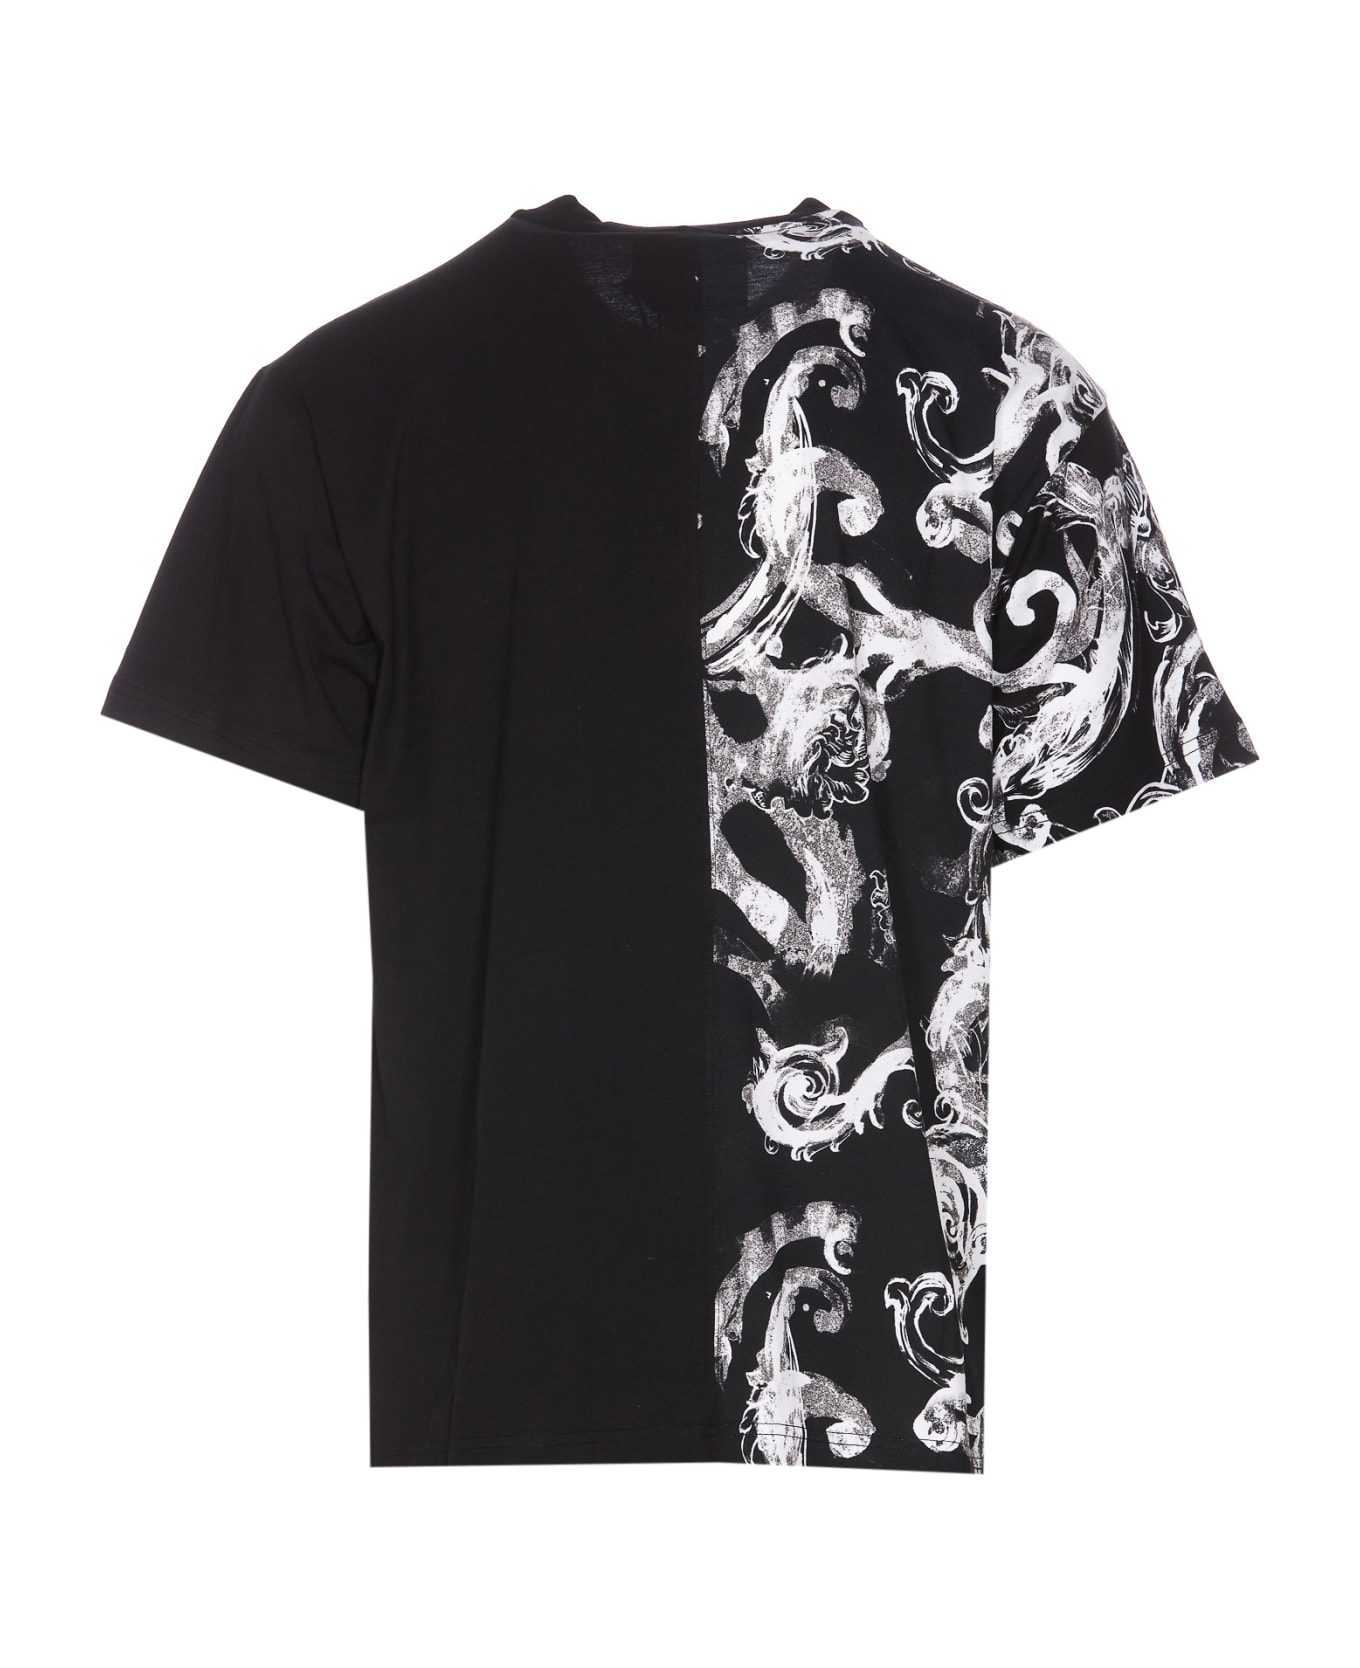 Versace Jeans Couture Printed T-shirt - Black シャツ